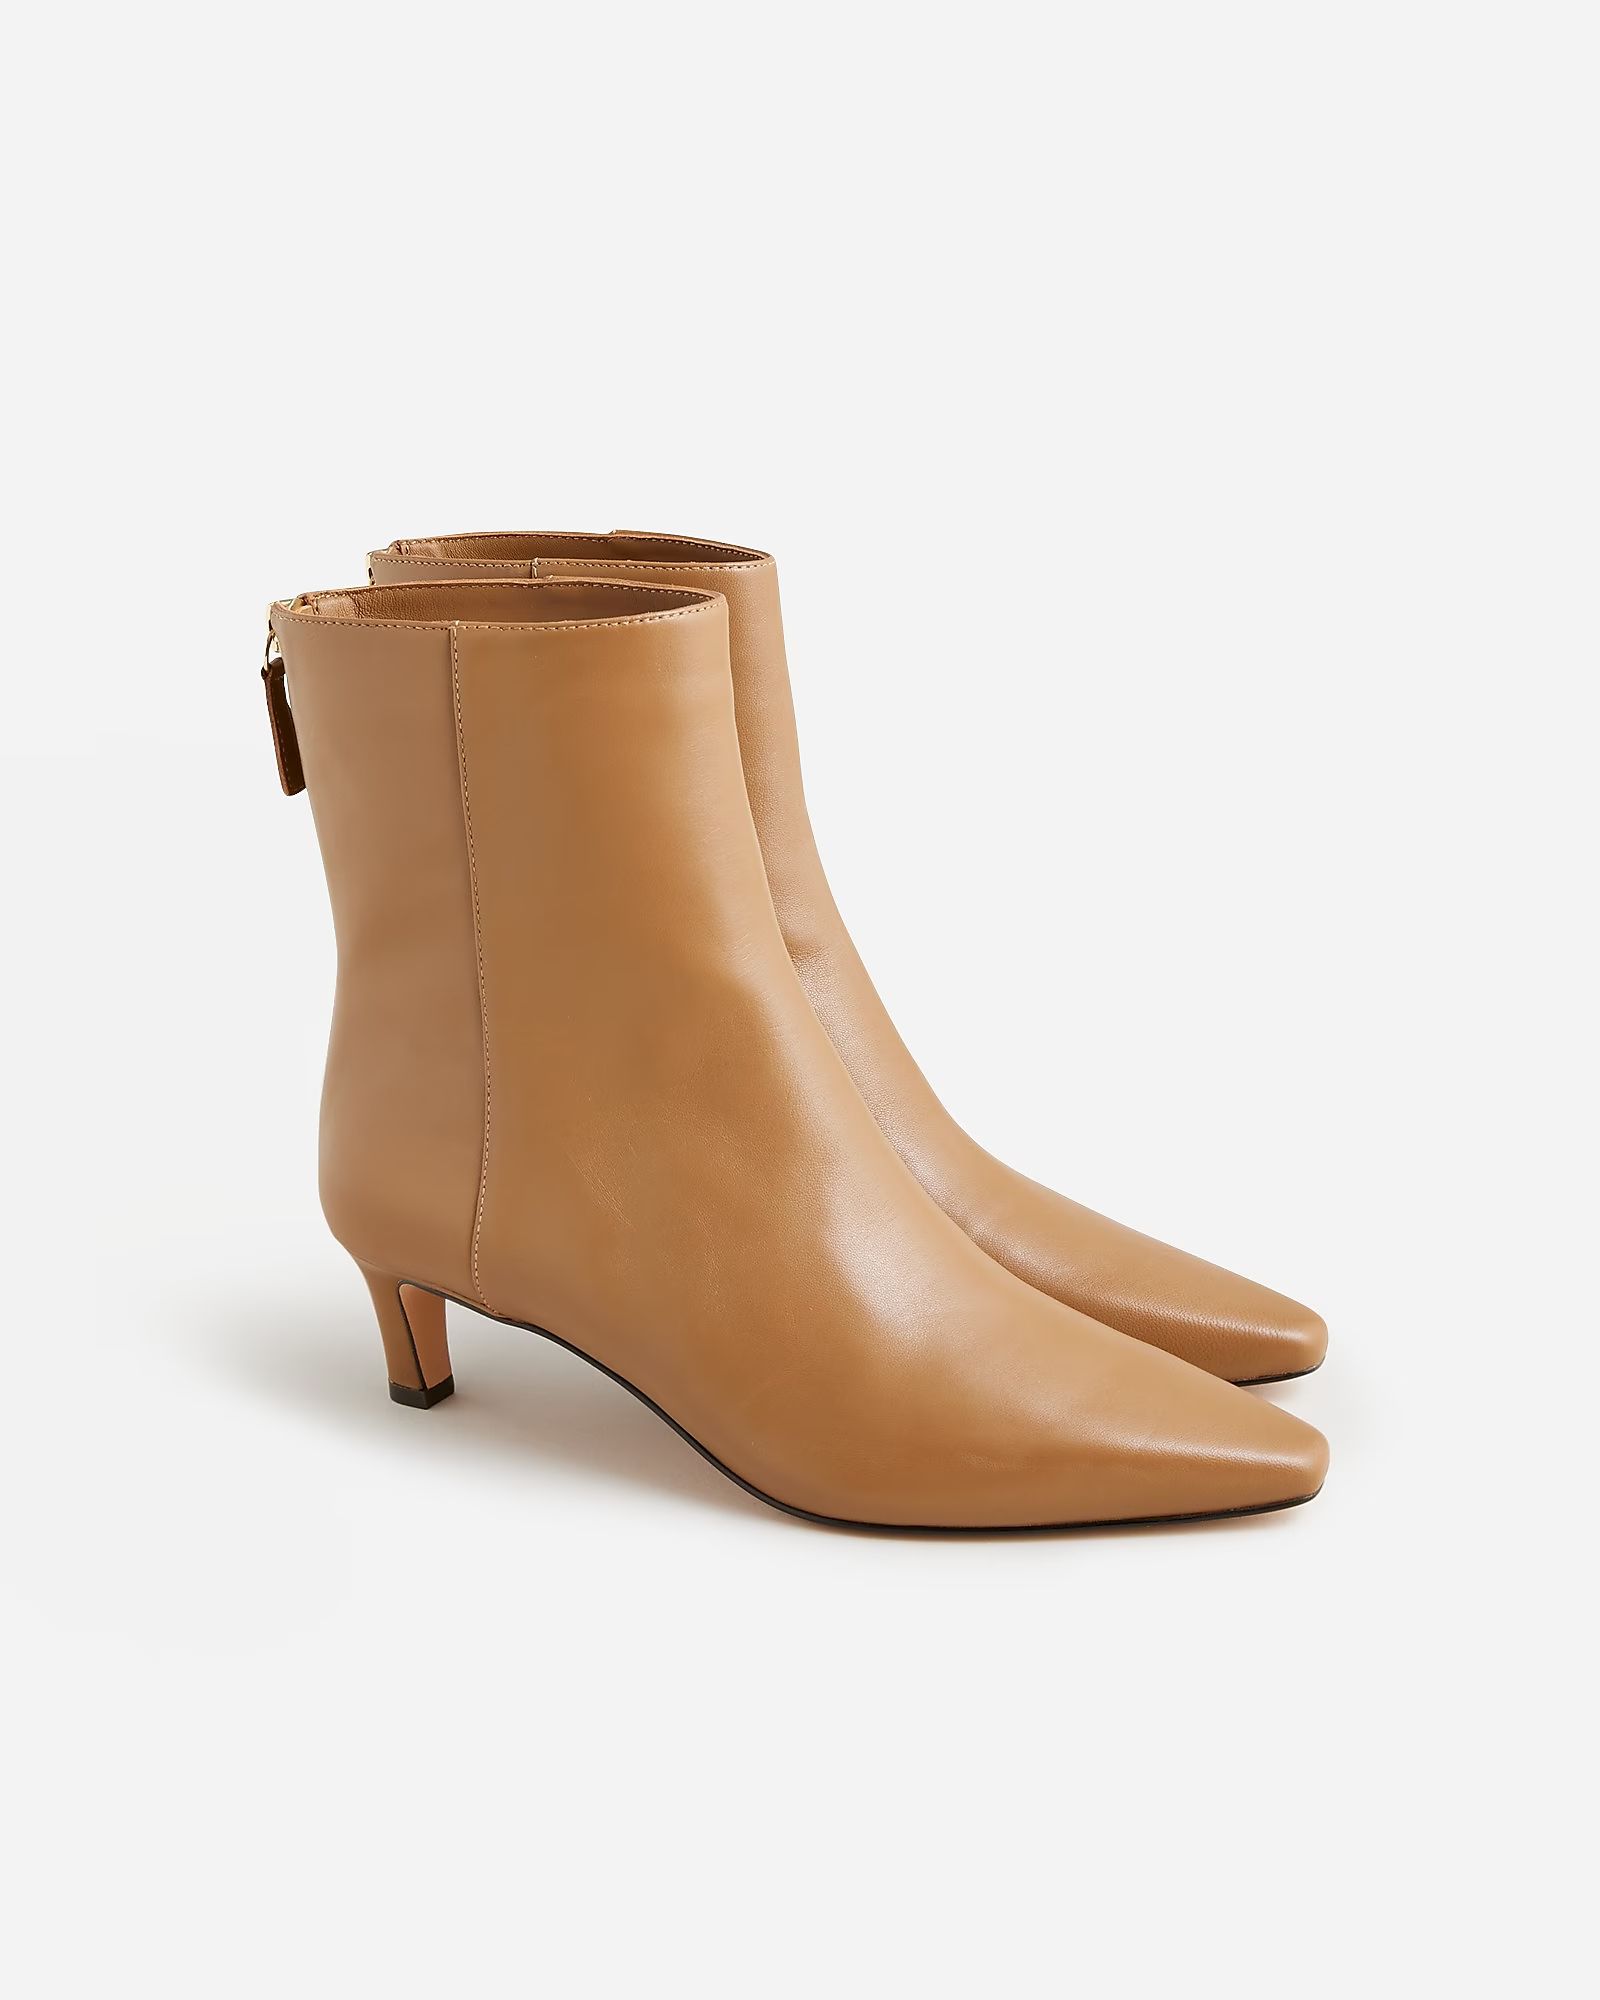 best seller3.6(5 REVIEWS)Stevie ankle boots in leather$248.00-$268.0030% off full price with code... | J.Crew US